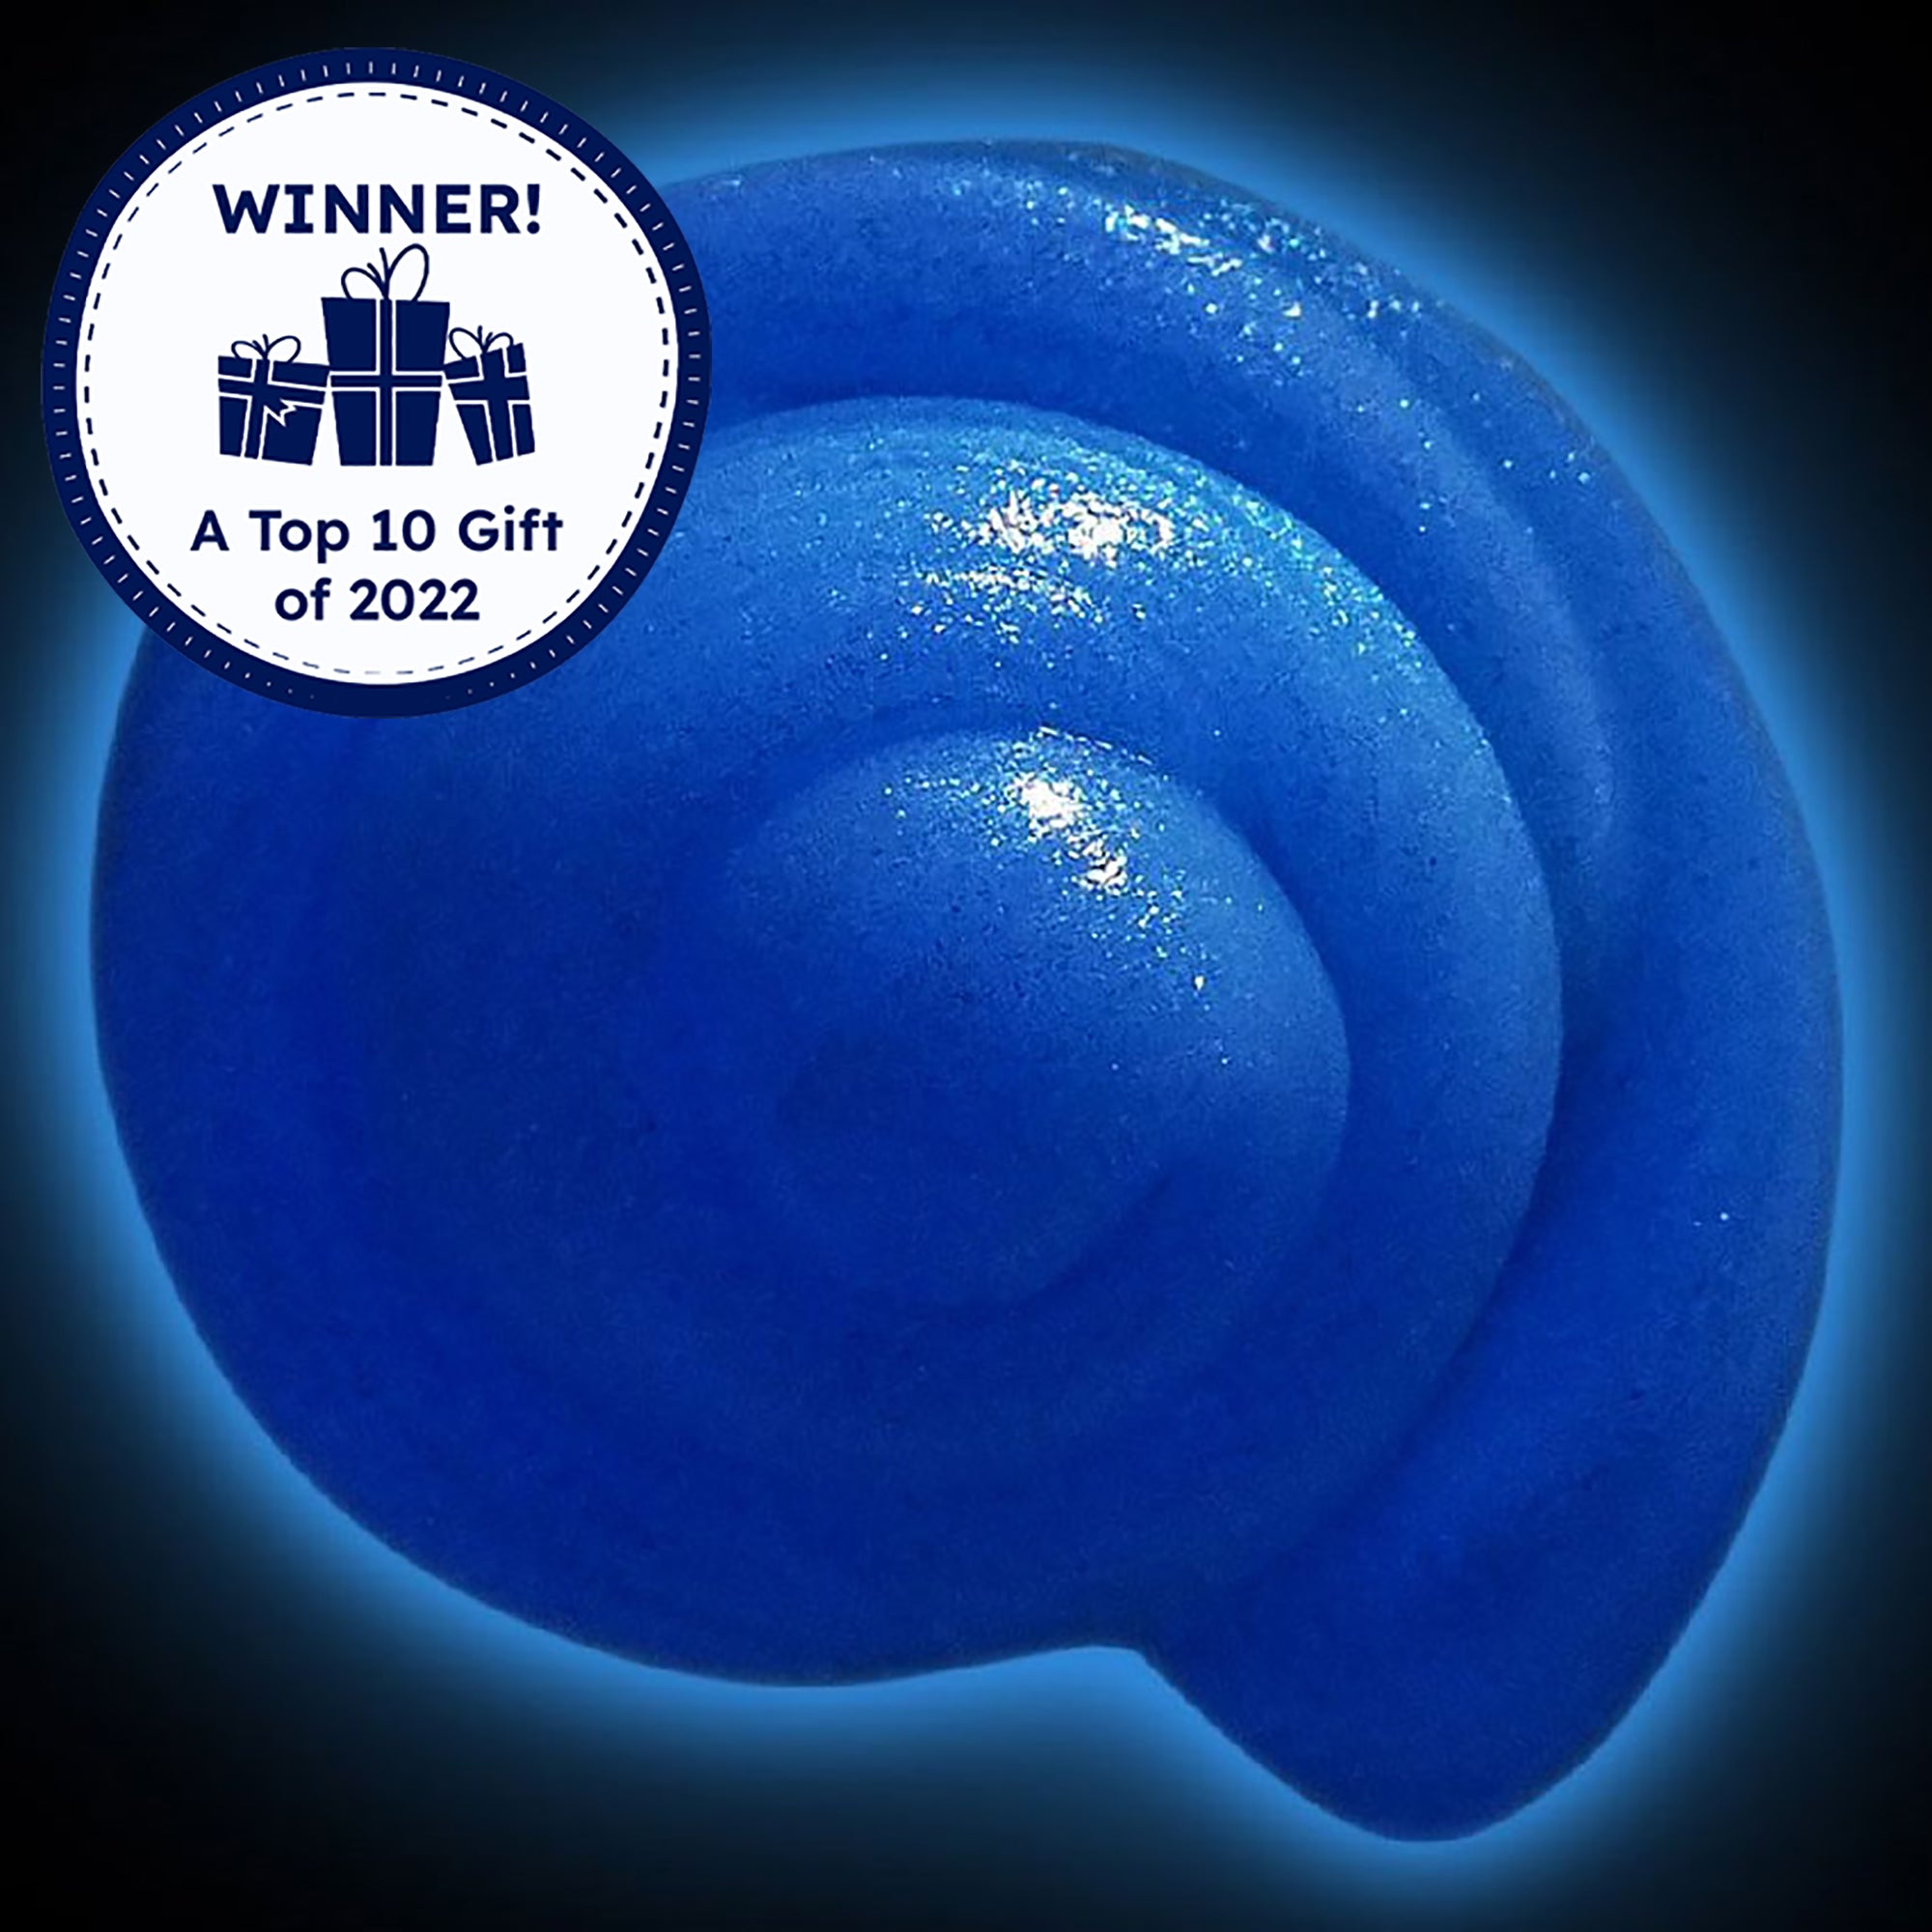 Mixed by Me, Glow, Thinking Putty. The shiny blue, glittered, putty is swirled like a snail shell. The background is black with a blue glow coming from the putty, showing that it is glowing in the dark. There is a Timberdoodle, Top 10 Gift of 2022, award seal is placed over the top-left of the picture.